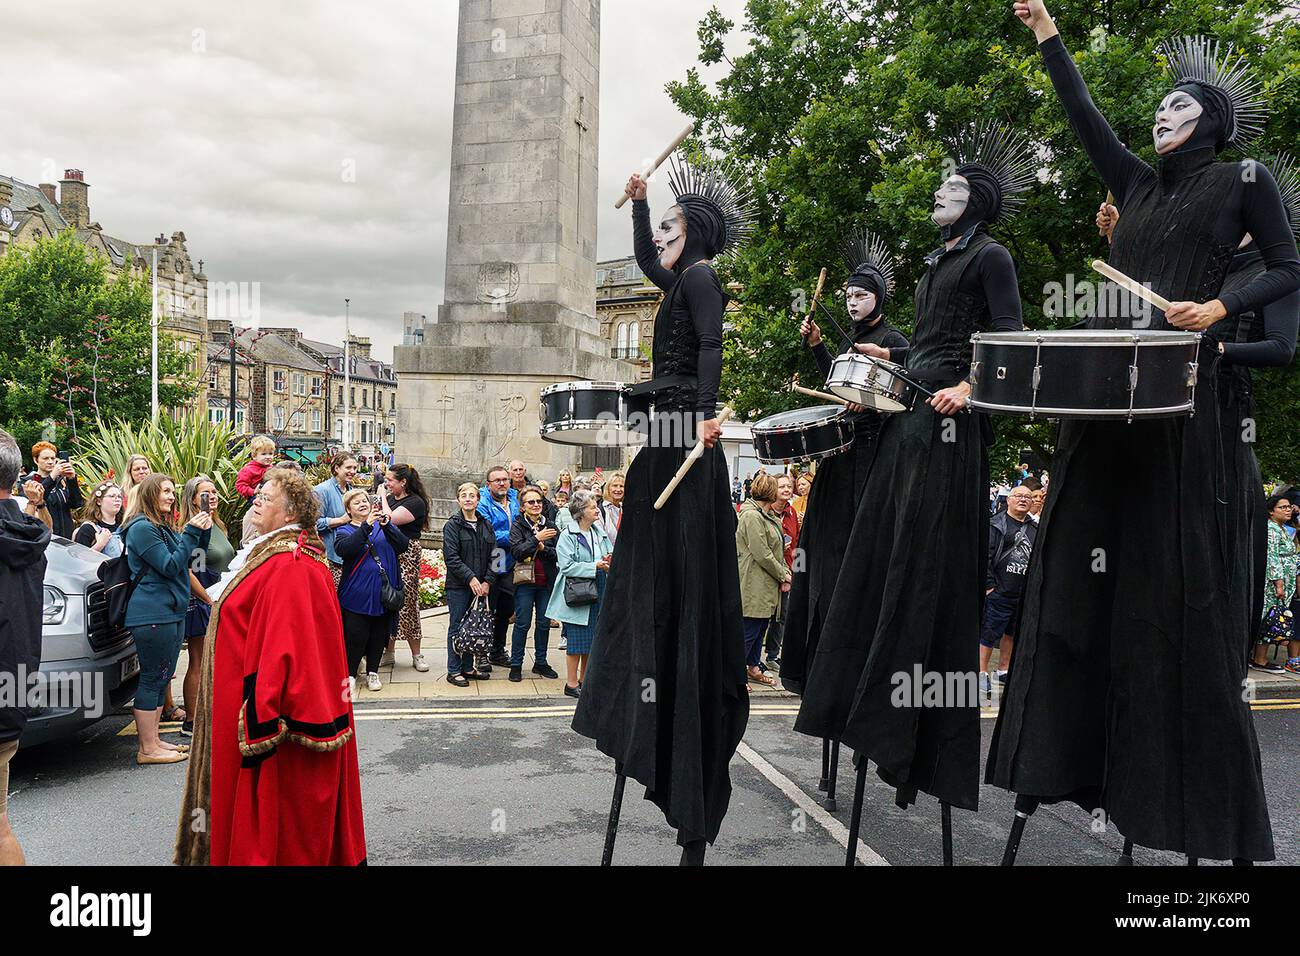 The Mayor of Harrogate, Victoria Oldham, is wearing a traditional red robe as she leads stilt drummers in the Harrogate Carnival Parade in North Yorks Stock Photo